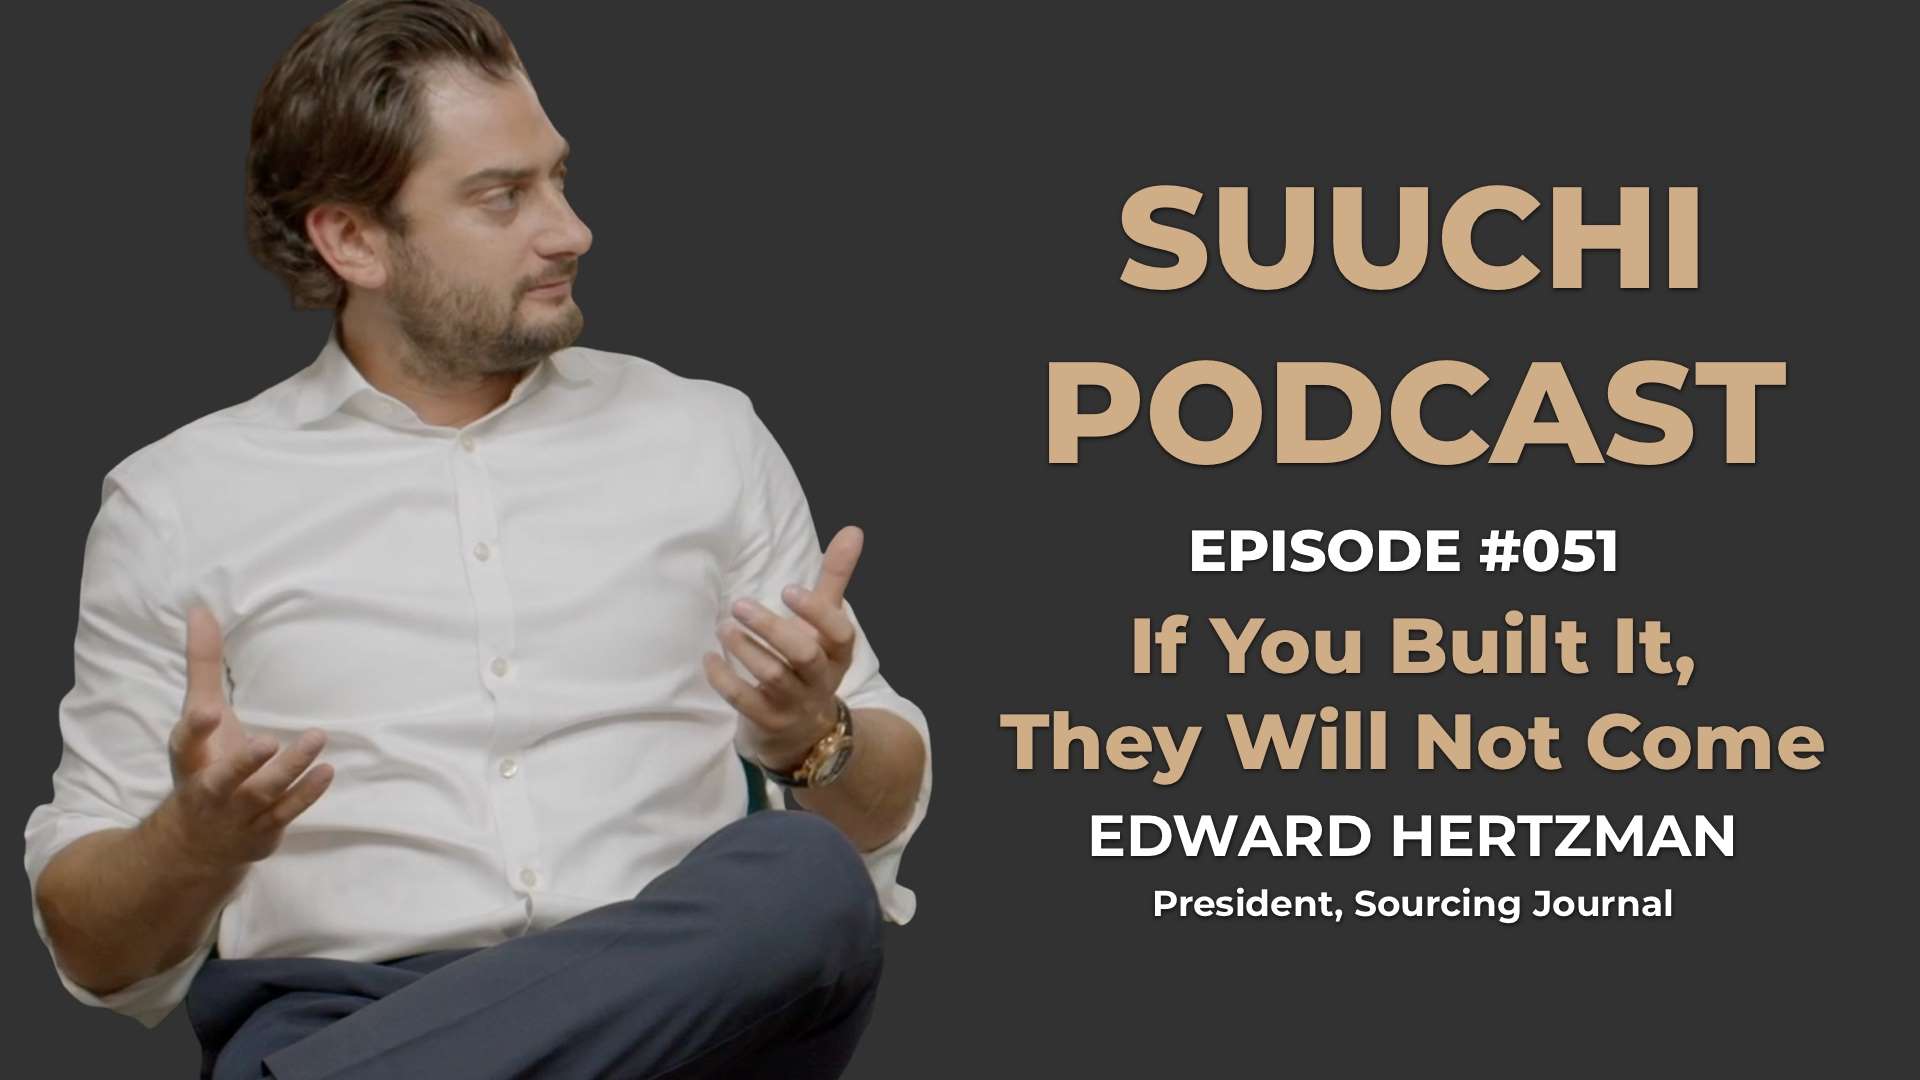 Suuchi Podcast #51: If You Build It, They Will Not Come - Edward Hertzman